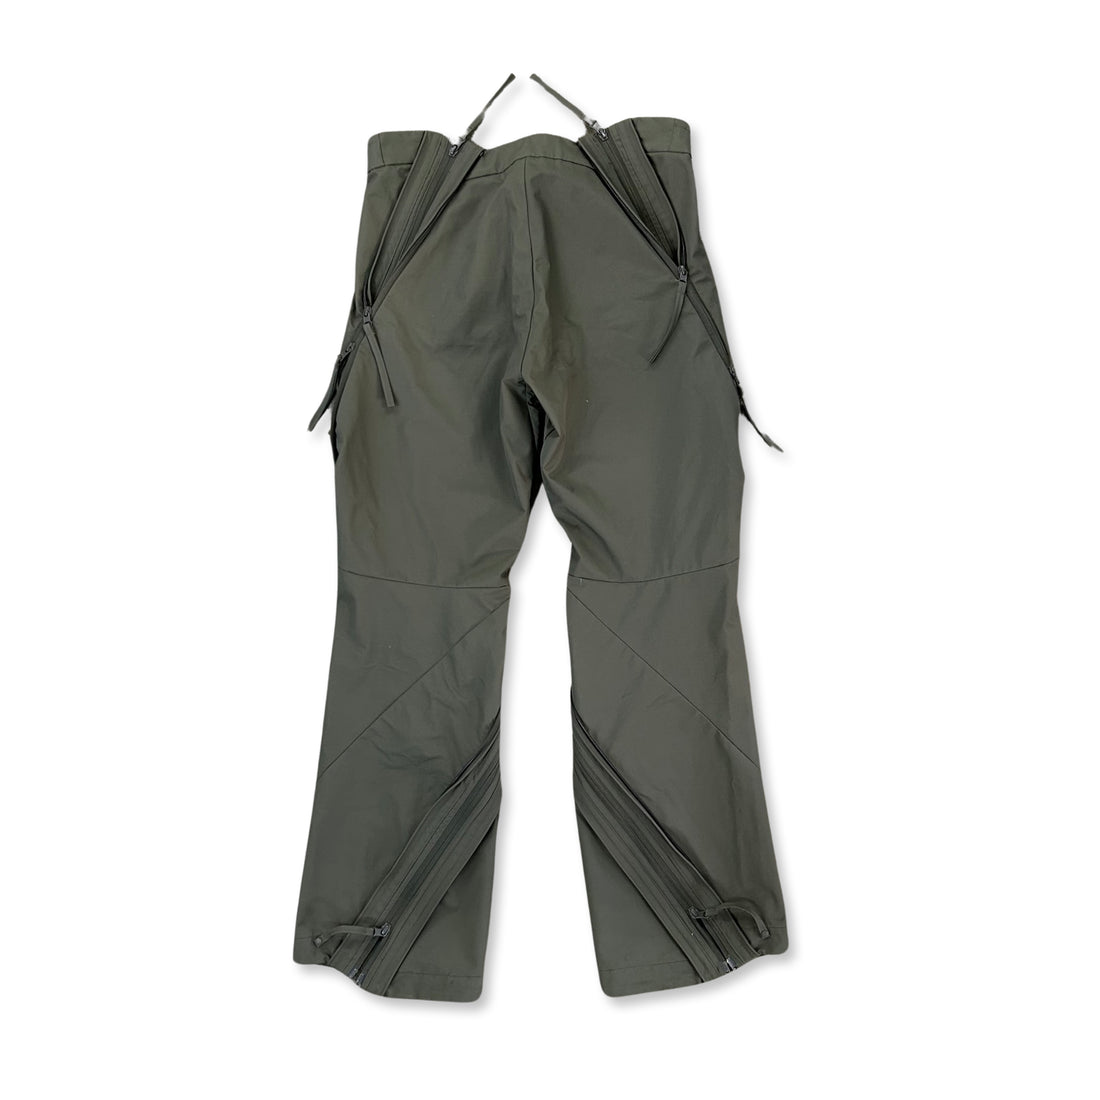 POST ARCHIVE FACTION 4.0+ TECHNICAL PANTS 'OLIVE'*